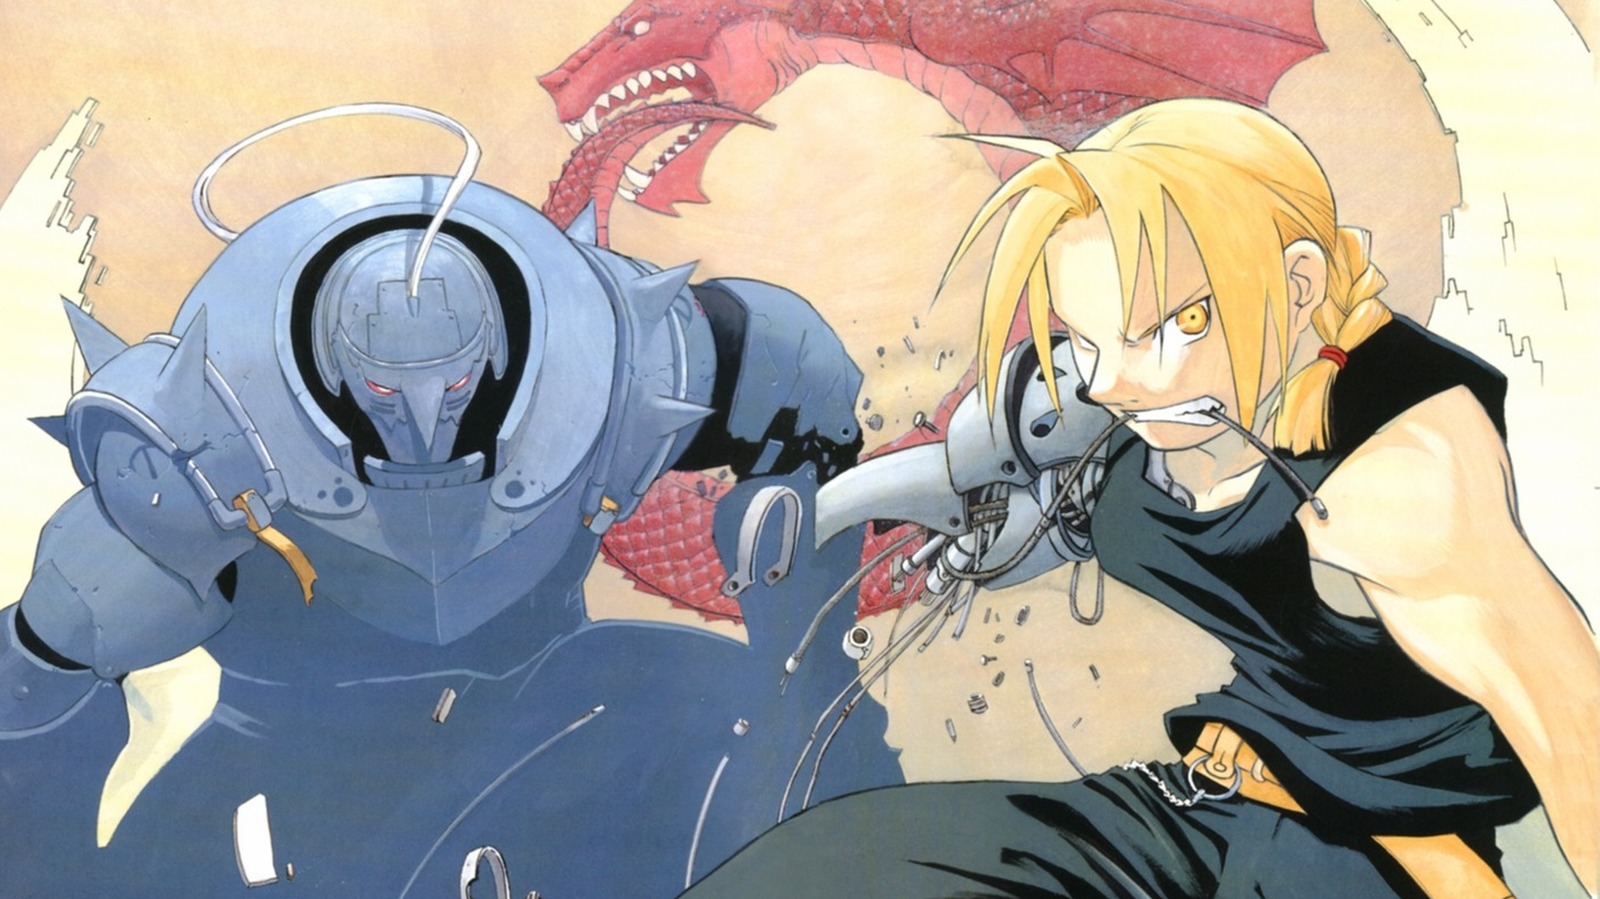 What is the difference between Fullmetal Alchemist and Fullmetal